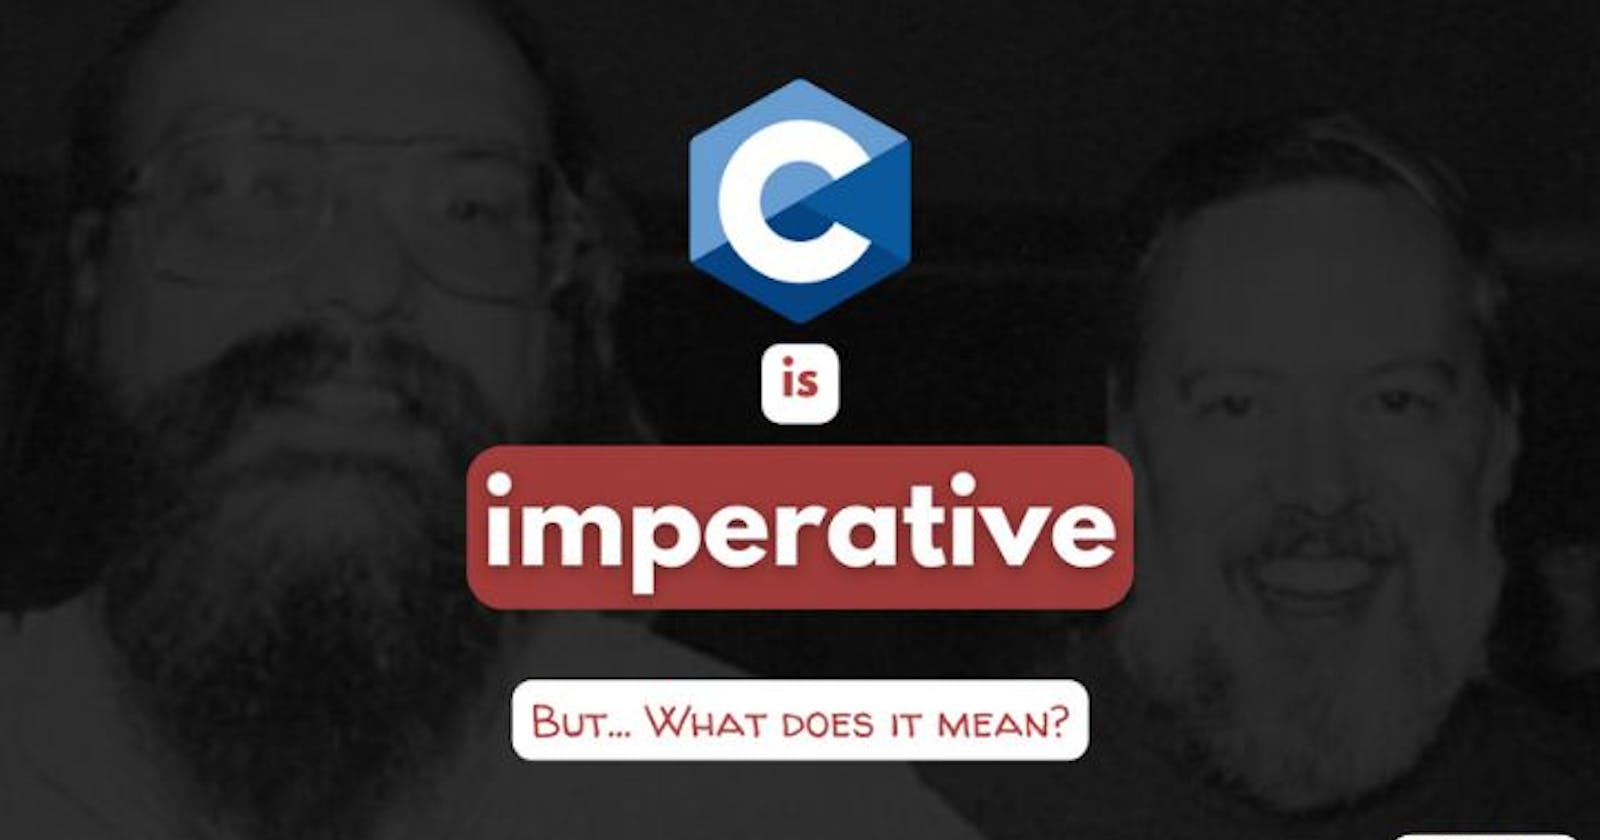 C is an imperative language